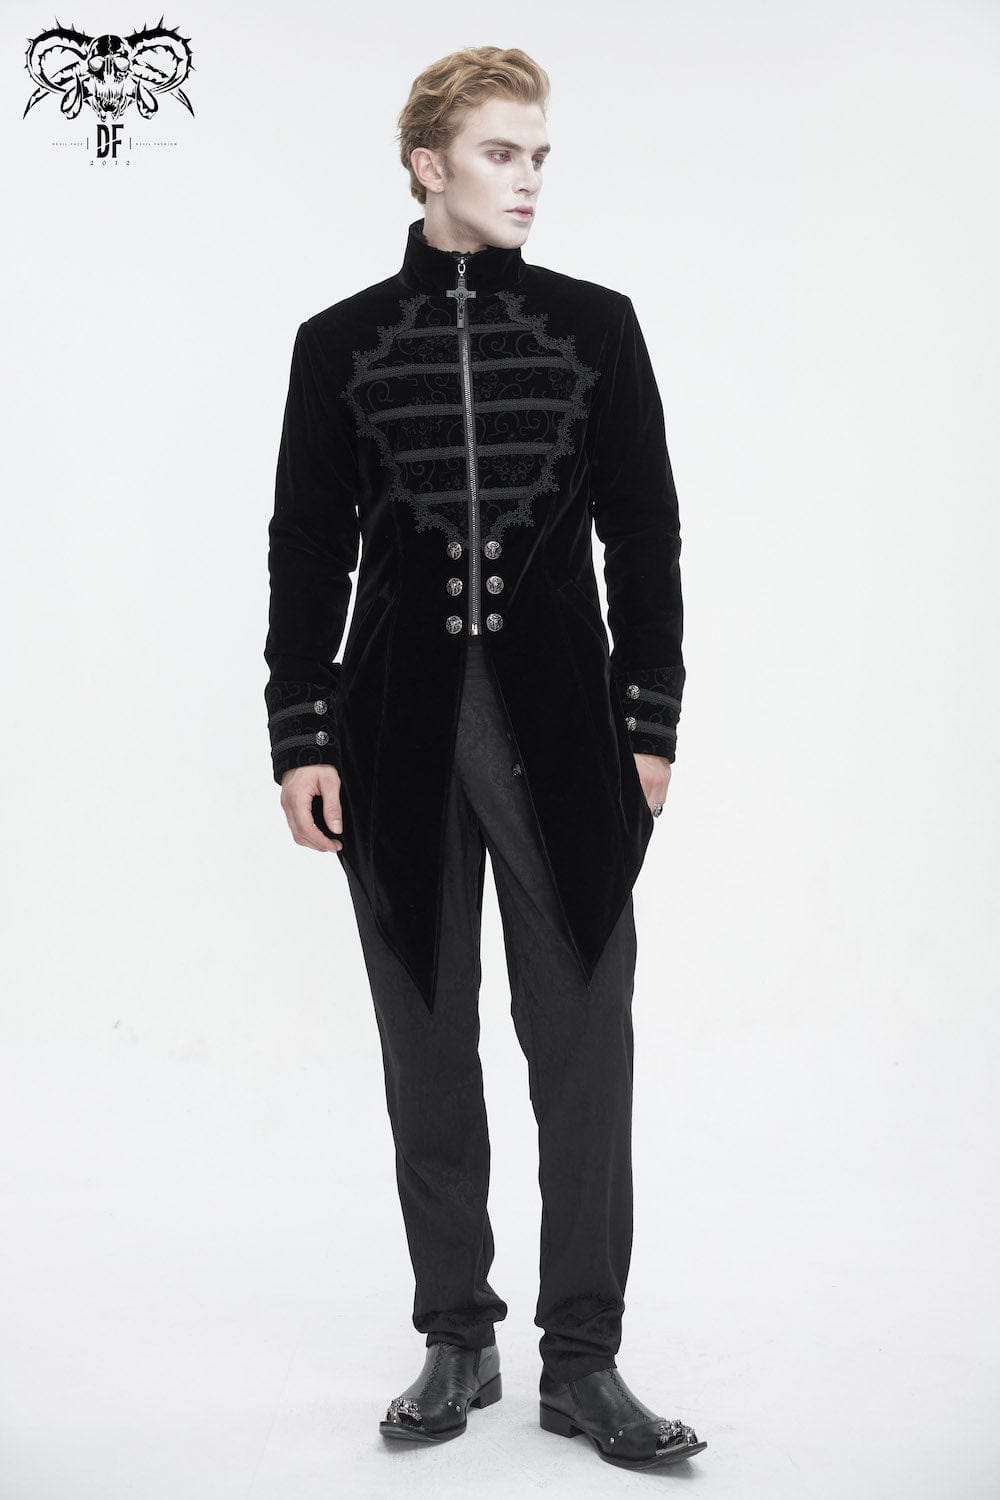 GOTHIC GROOM WEARING THE GOTHIC CHAOS MAGIC TAILCOAT IN BLACK VELVET WITH STRONG TAILORING AND ORNATE BRAID AND BUTTON DETAILS FROM DEVIL FASHION AT GALLERY SERPENTINE FOR HIS WEDDING OUTFIT